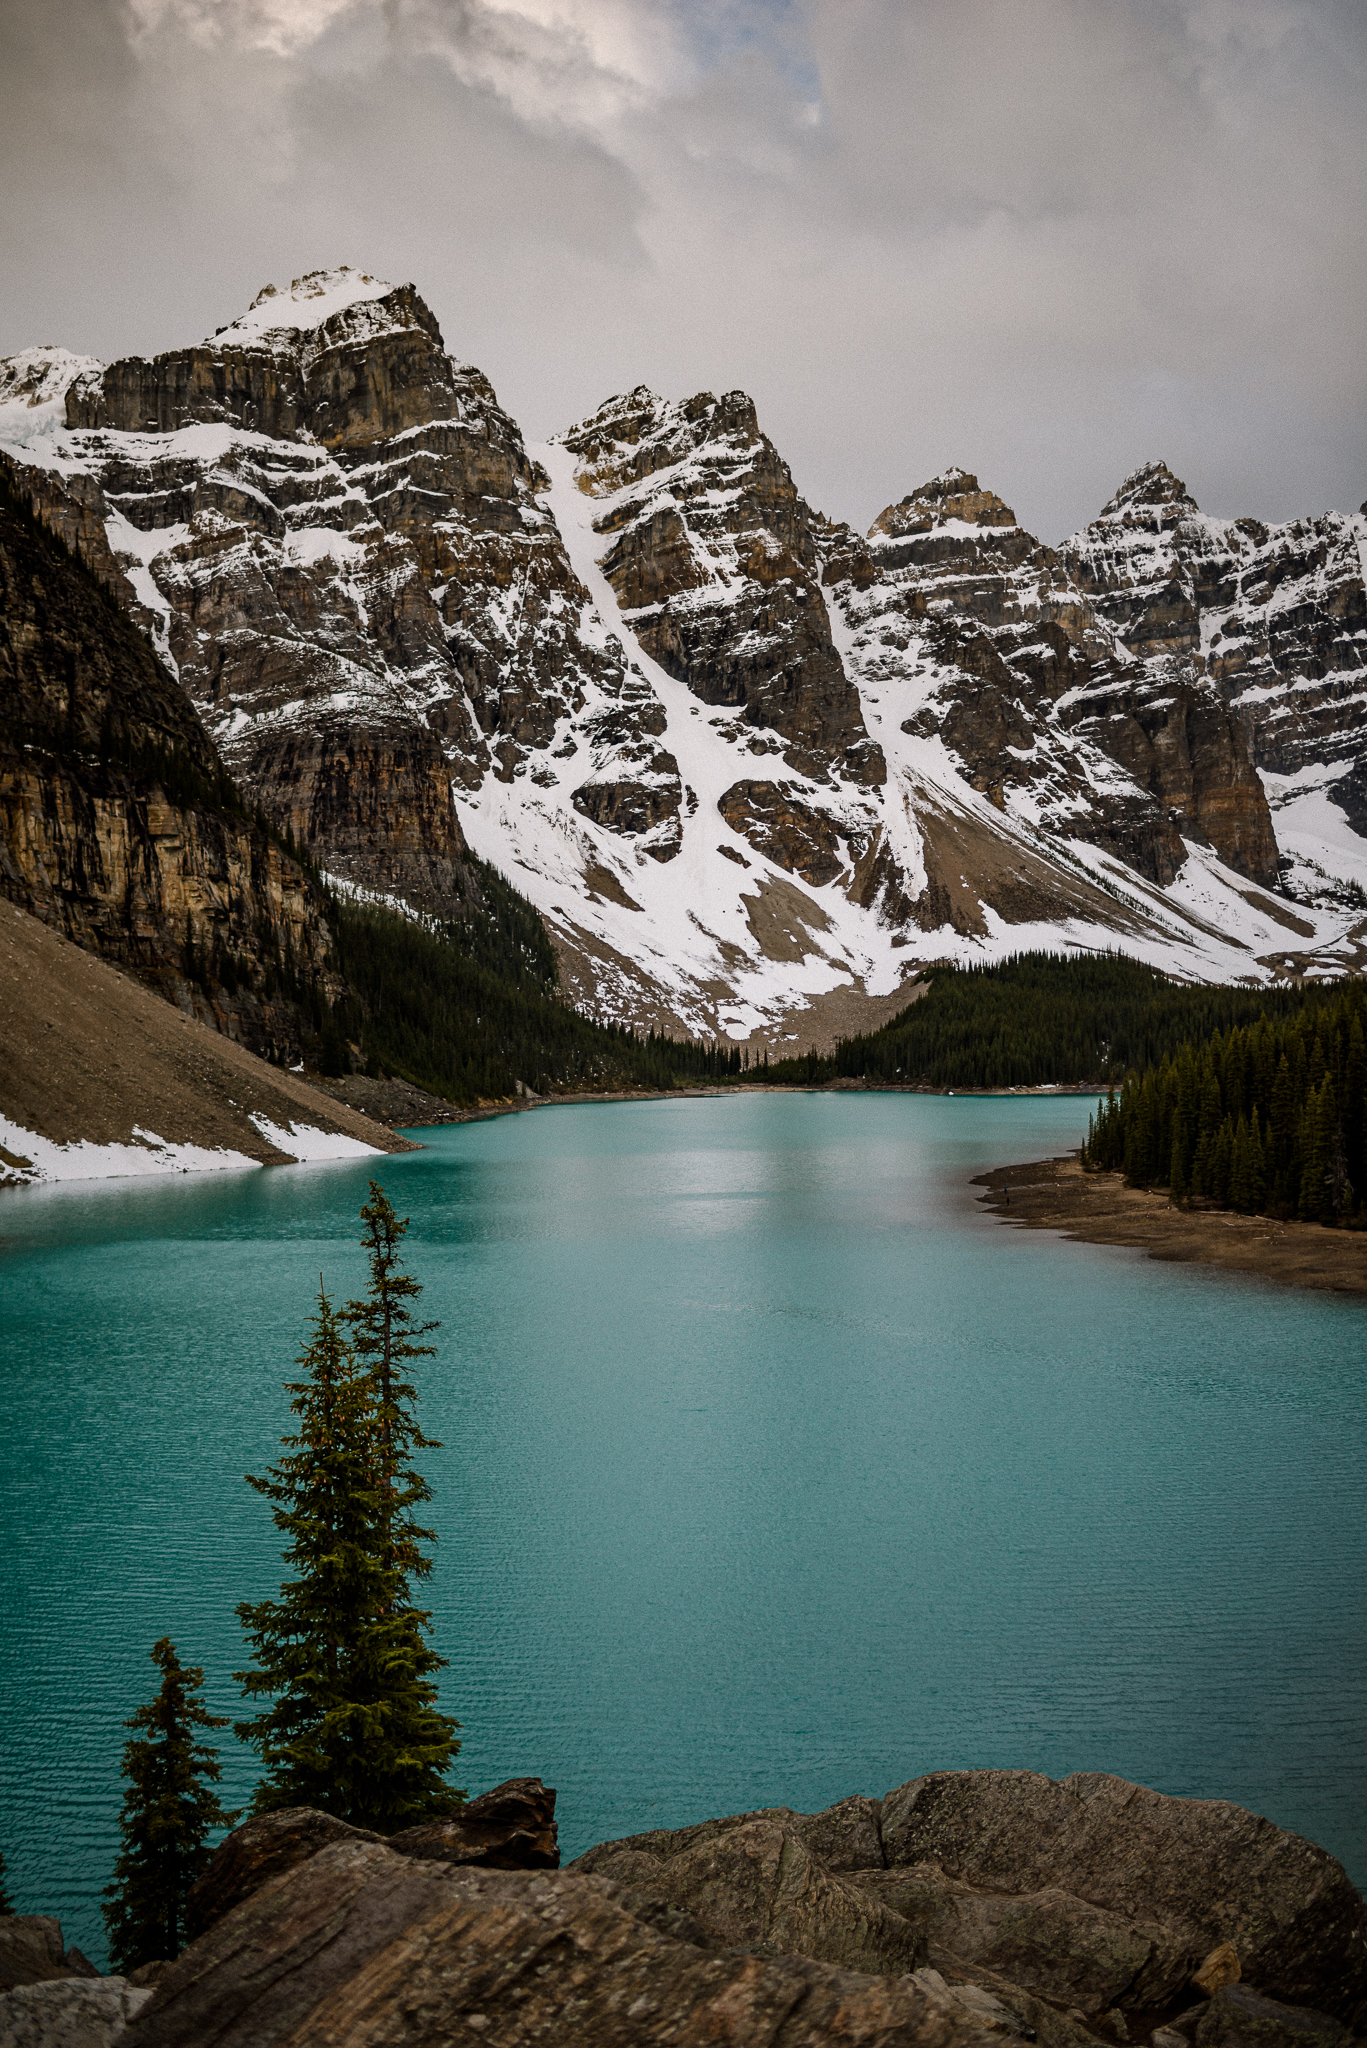 Landscape shot of Moraine Lake, Alberta with trees in foreground